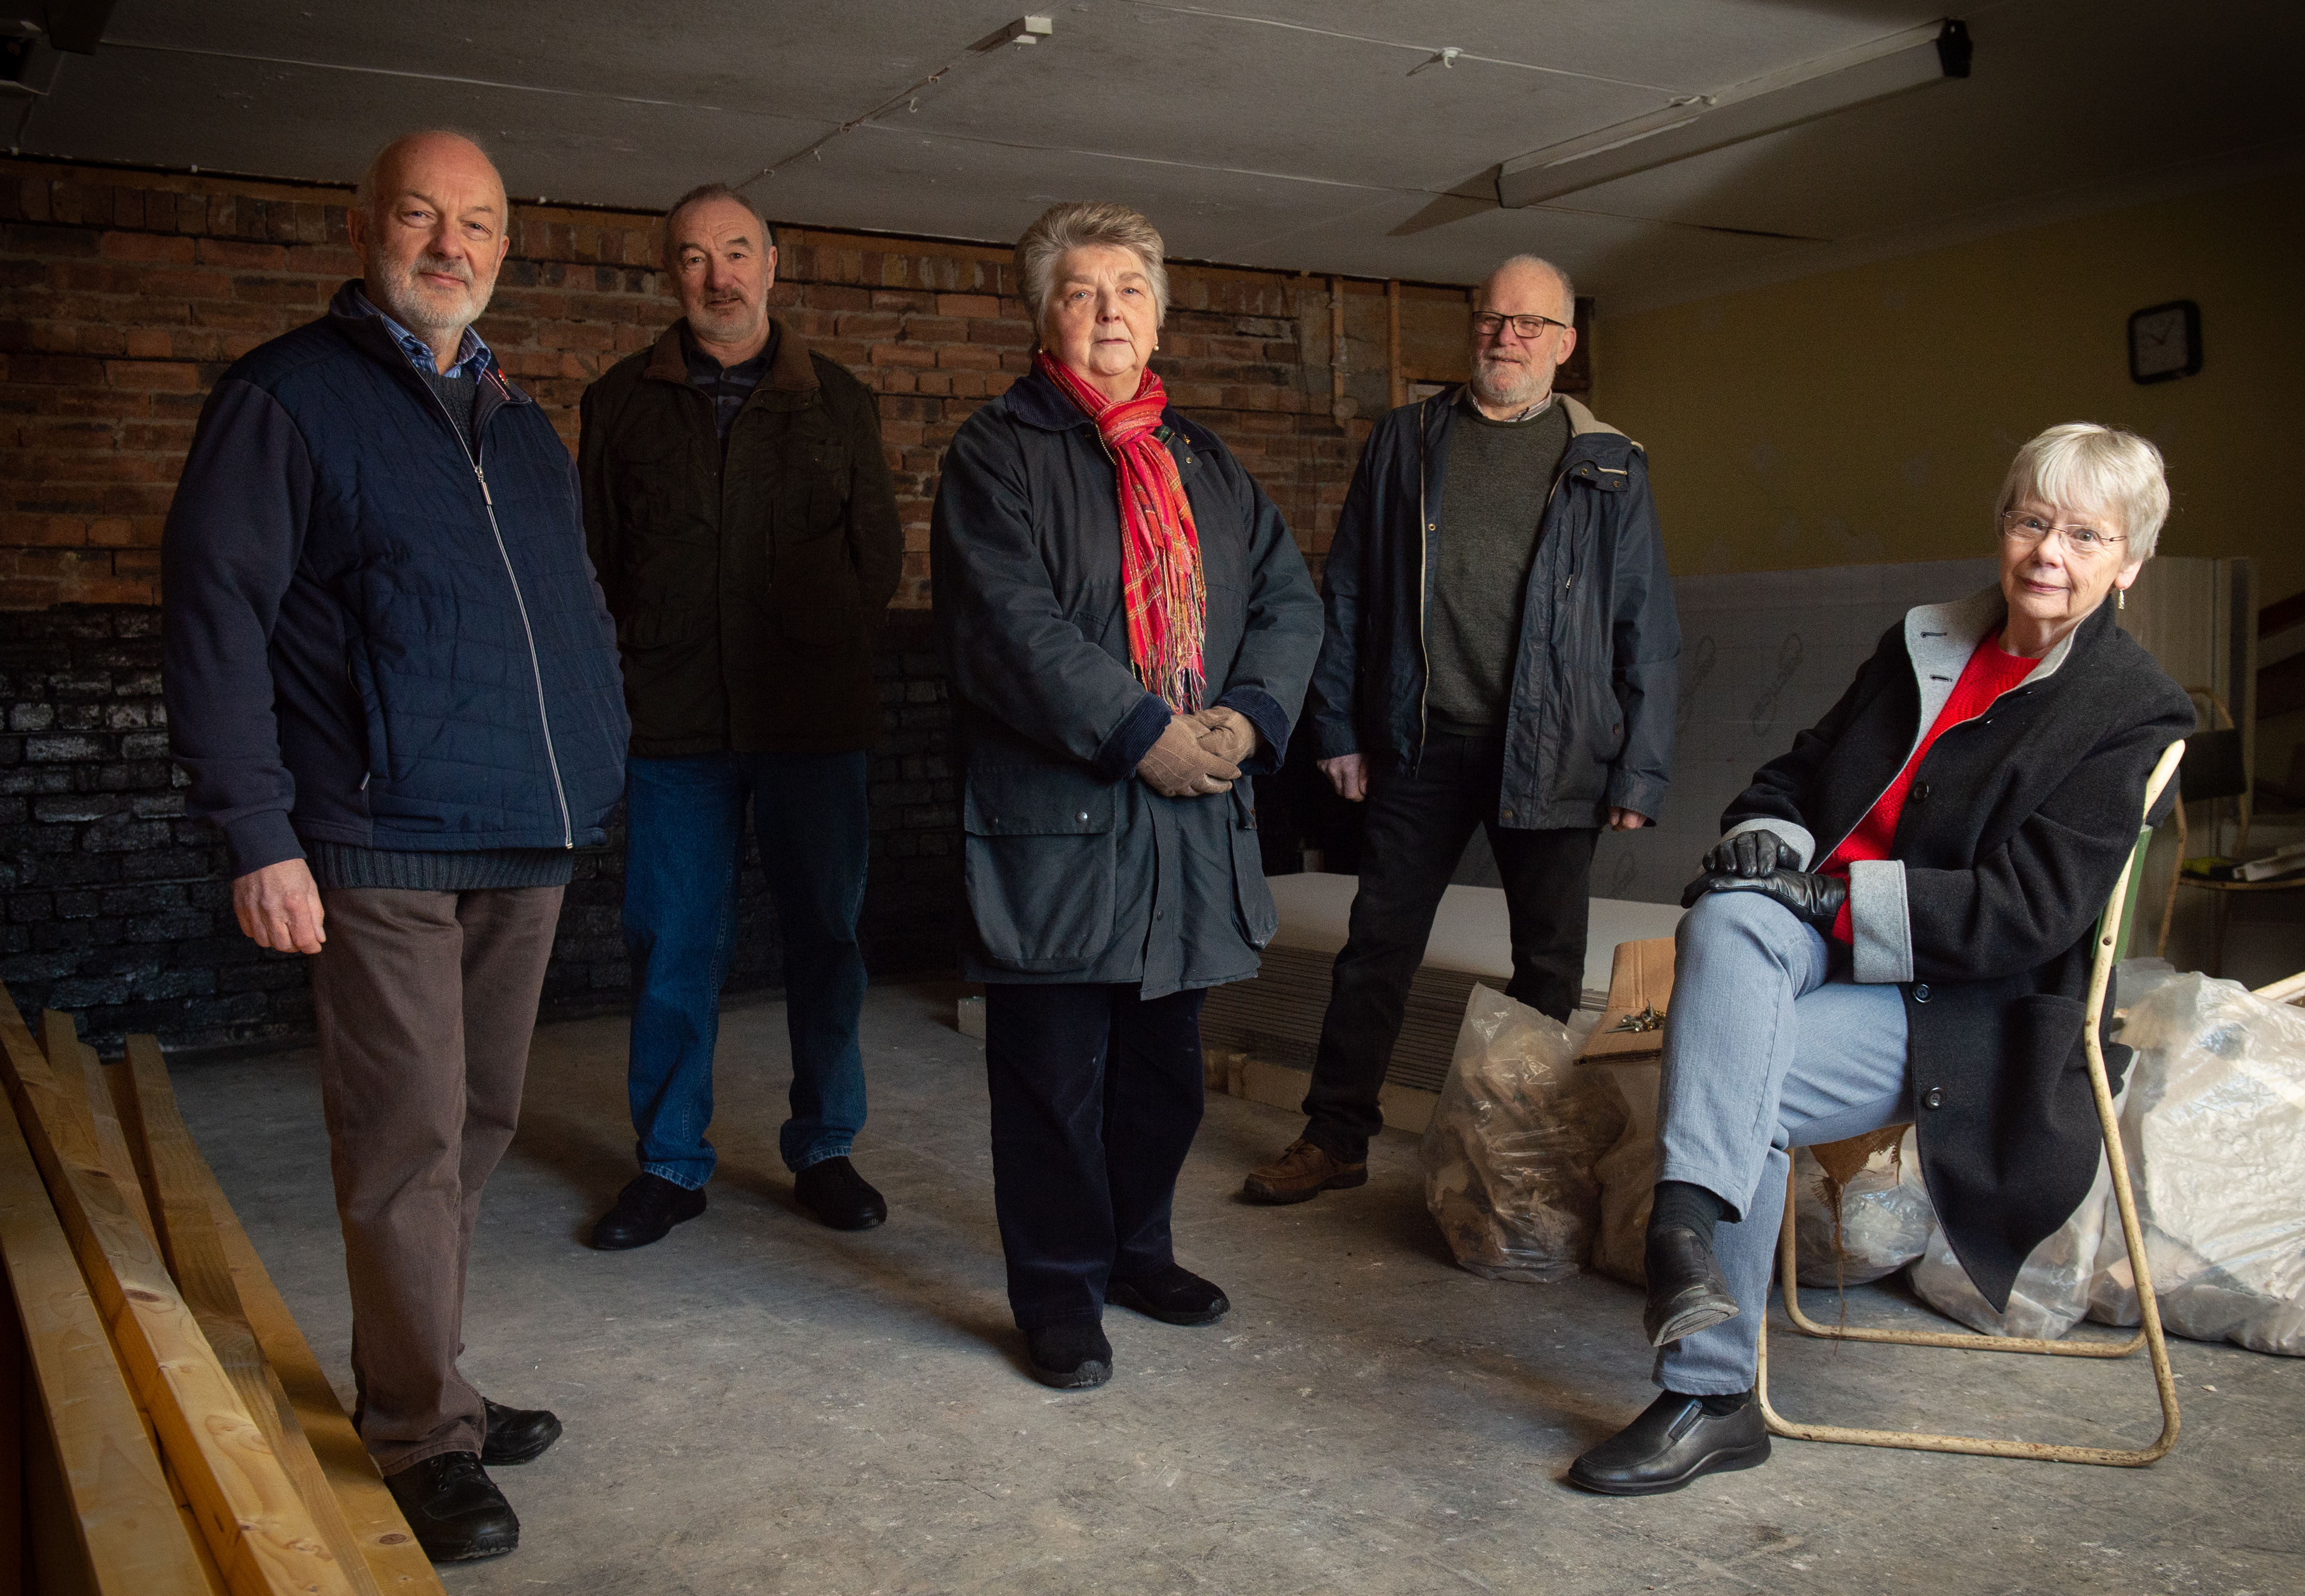 The Cullen, Deskford and Portknockie Heritage Group wants to open a permanent heritage centre in the former Cullen Town Hall. Pictured: Jim Mackay, Alan Maloney, Brenda Wood, Pete Mason, Pat Bardhill. Picture by Jason Hedges